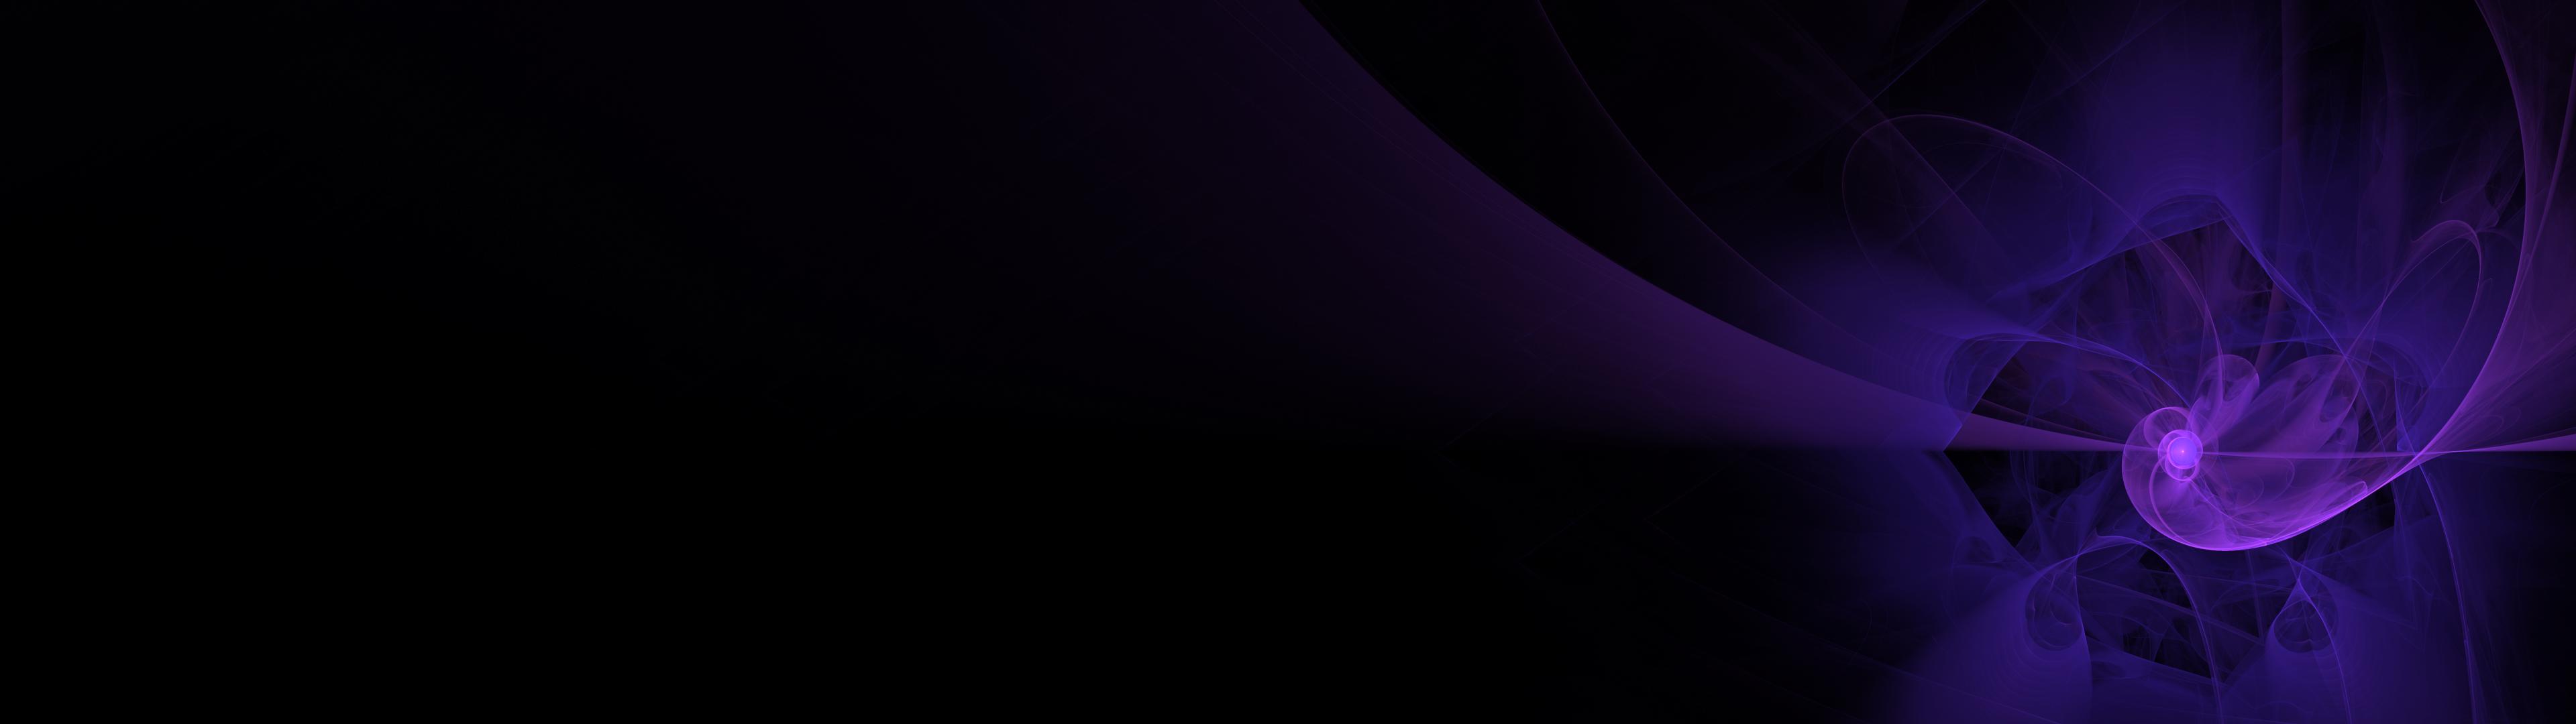 Purple And Black Backgrounds - Wallpaper Cave